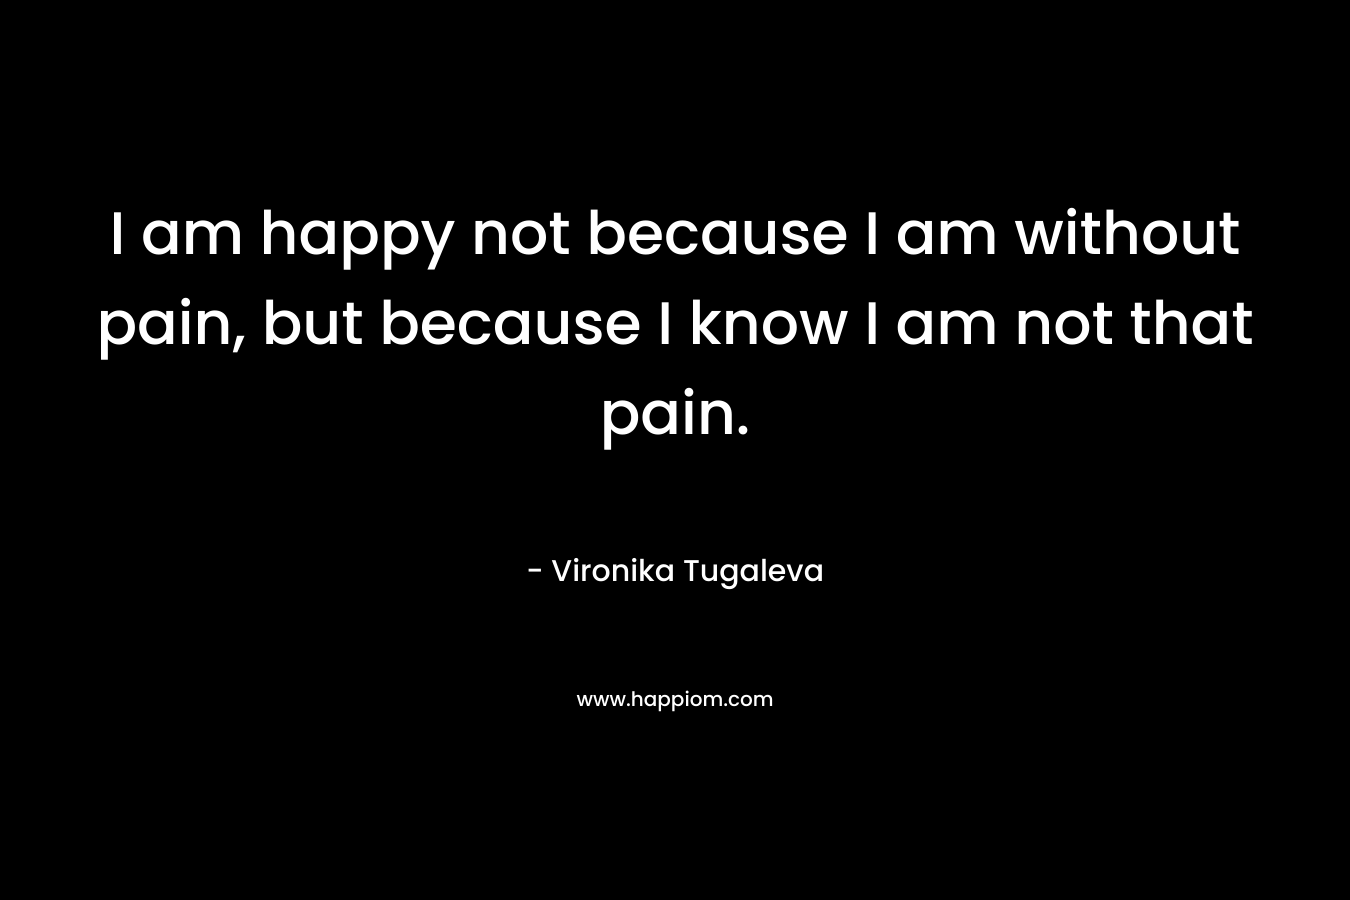 I am happy not because I am without pain, but because I know I am not that pain.